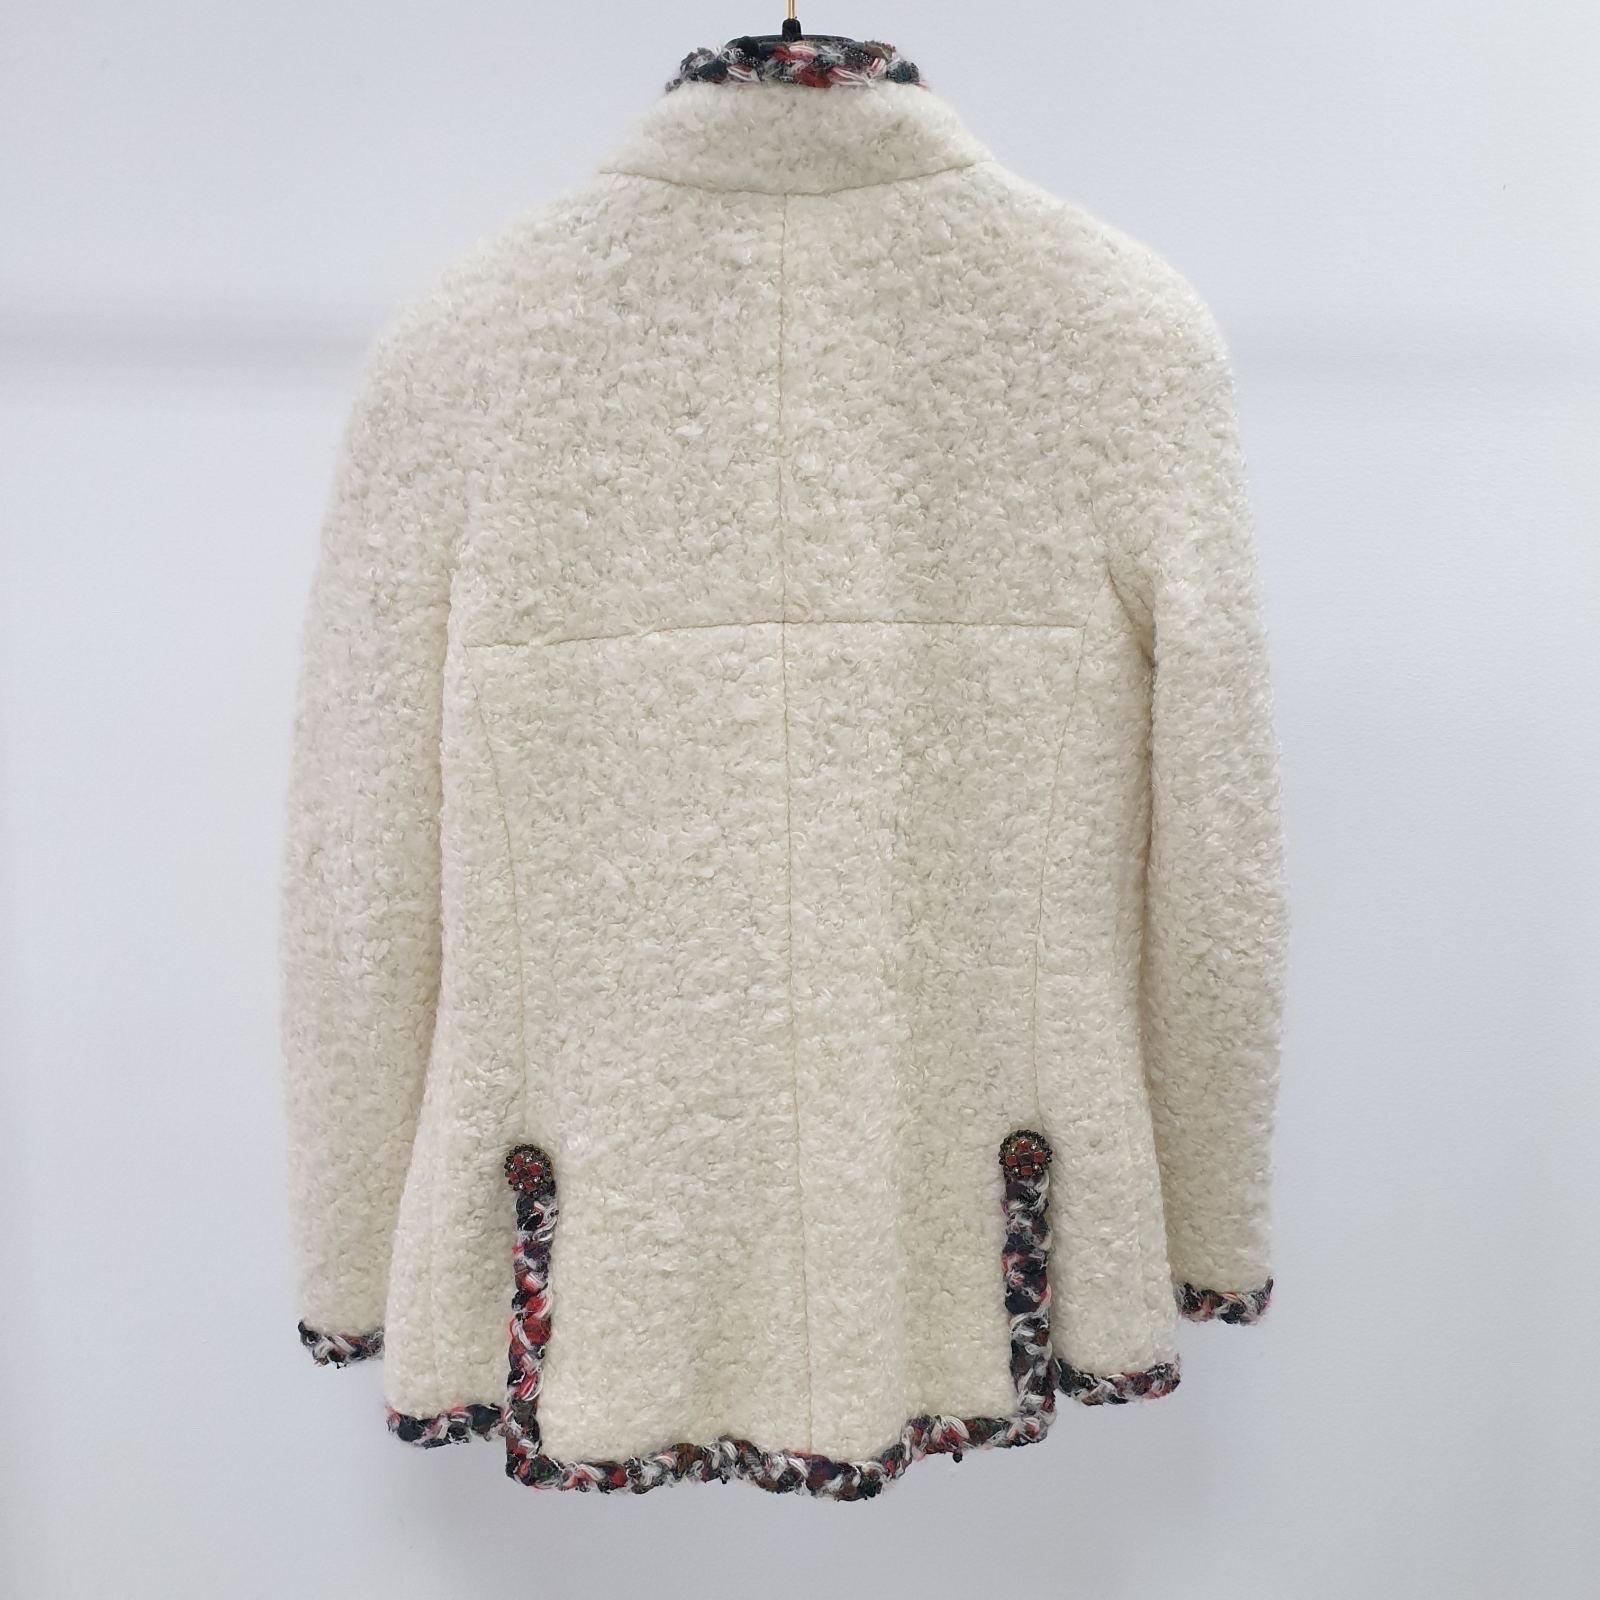 Hard to meet Chanel white faux fur jacket from Catwalk of Paris / EDINBURGH Collection, 2013 Pre-Fall Metiers d'Art 
Retail price over 9,000$. 
- CC logo jewel Gripoix button 
- signature contrast braided tartan trim
 - full silk lining
Sz.36
very